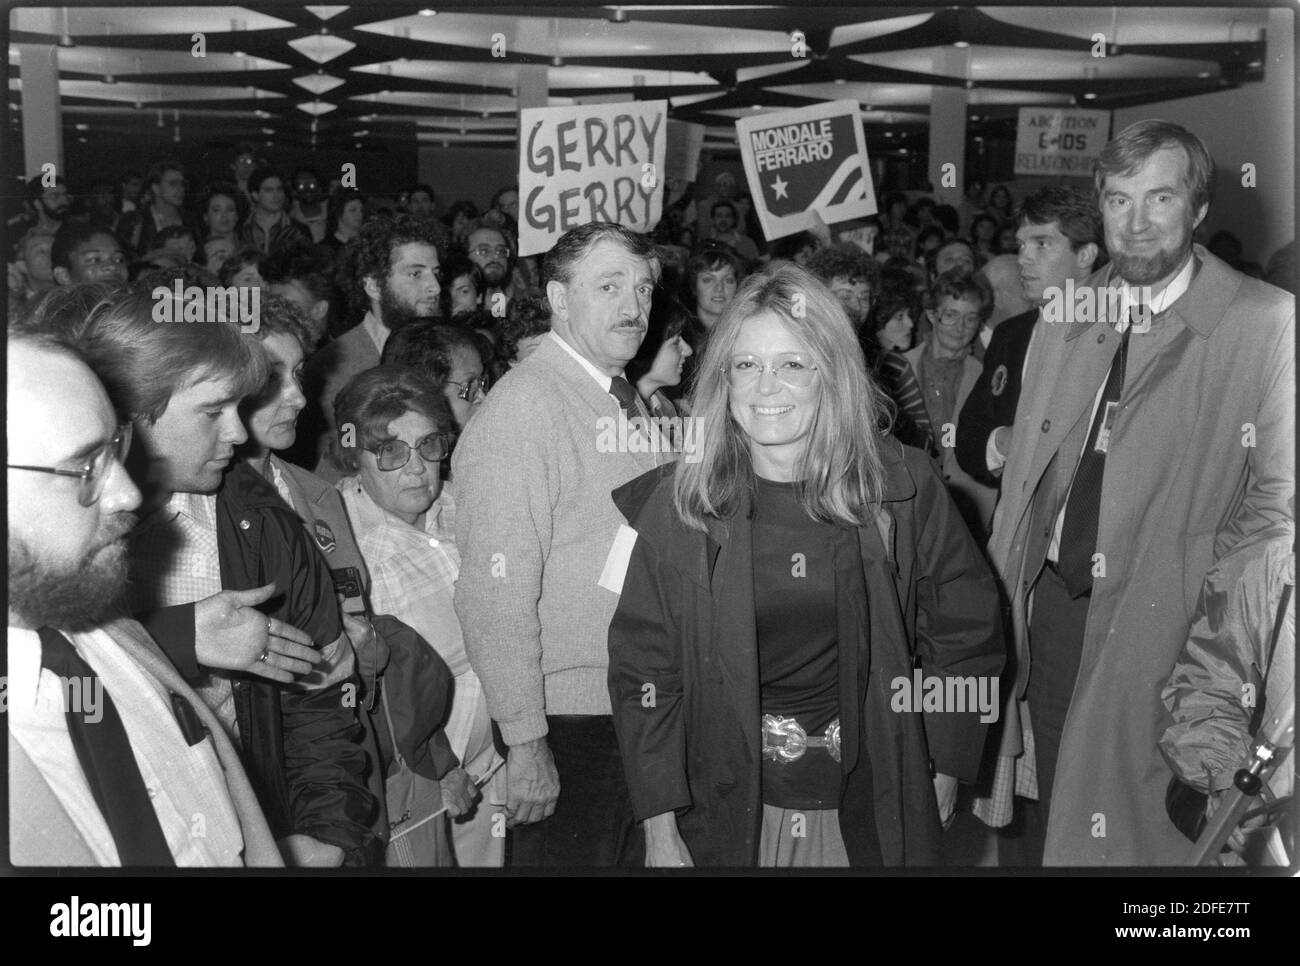 Gloria Steinem makes an appearance during a rally for vice-presidential candidate Geraldine Ferraro in Akron Ohio on Oct. 1, 1984. Ernie Mastroianni photo Stock Photo